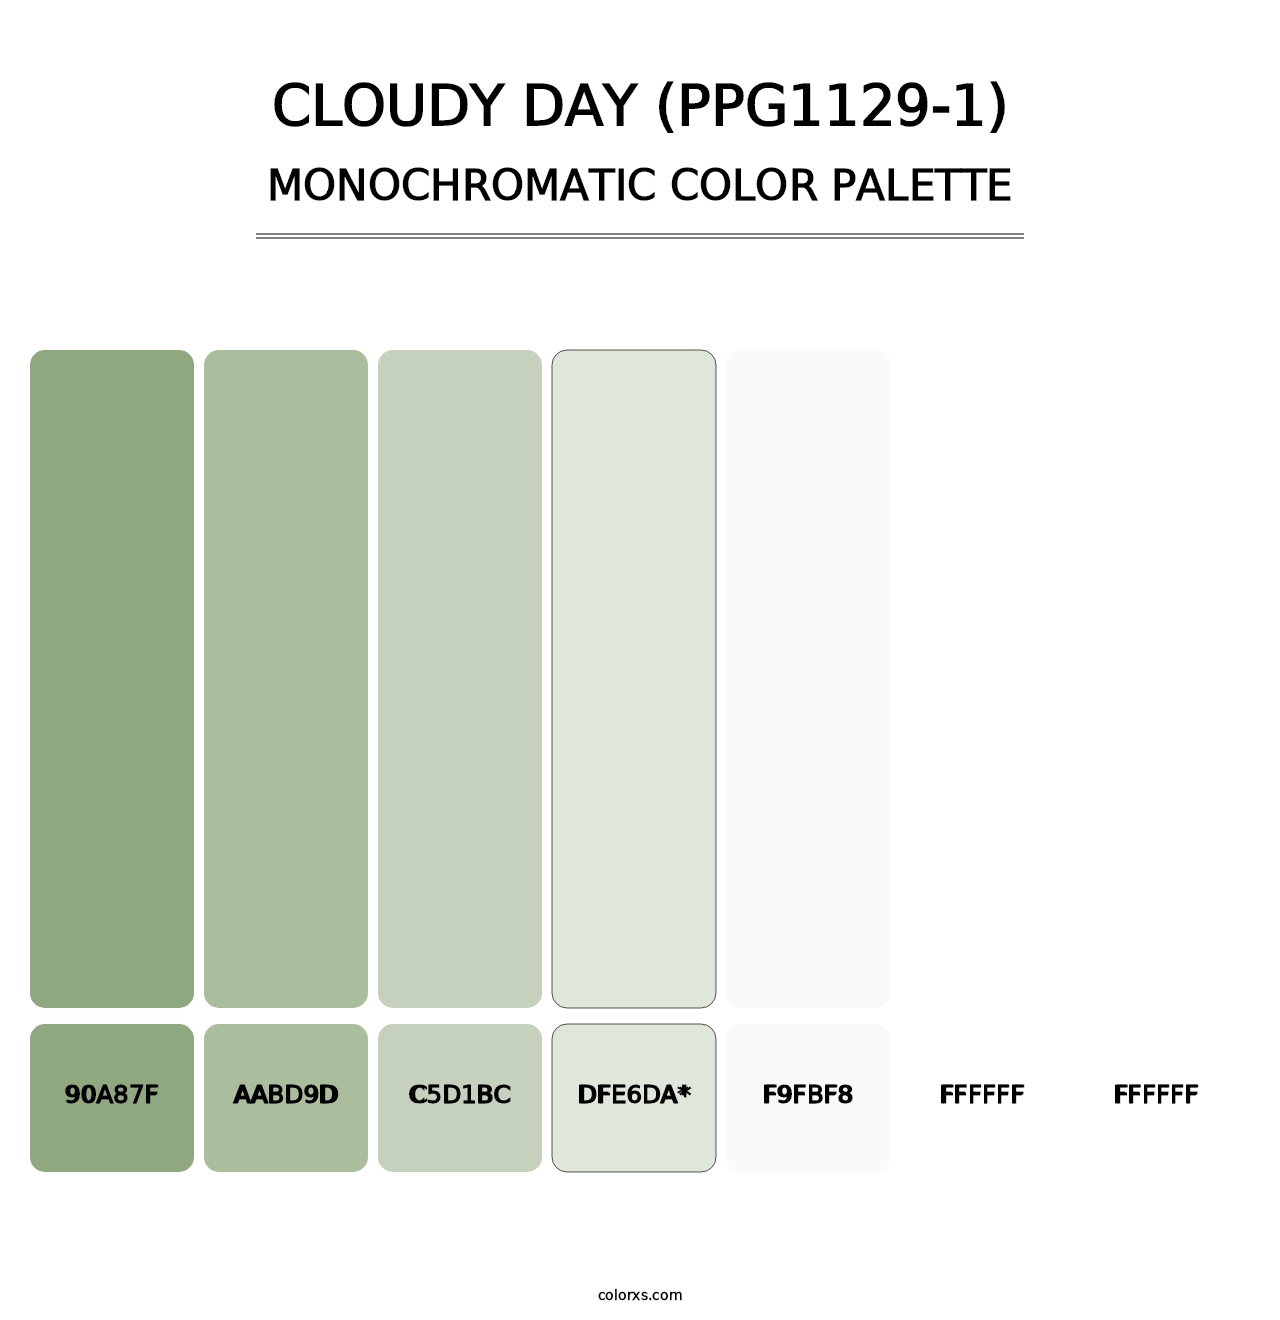 Cloudy Day (PPG1129-1) - Monochromatic Color Palette